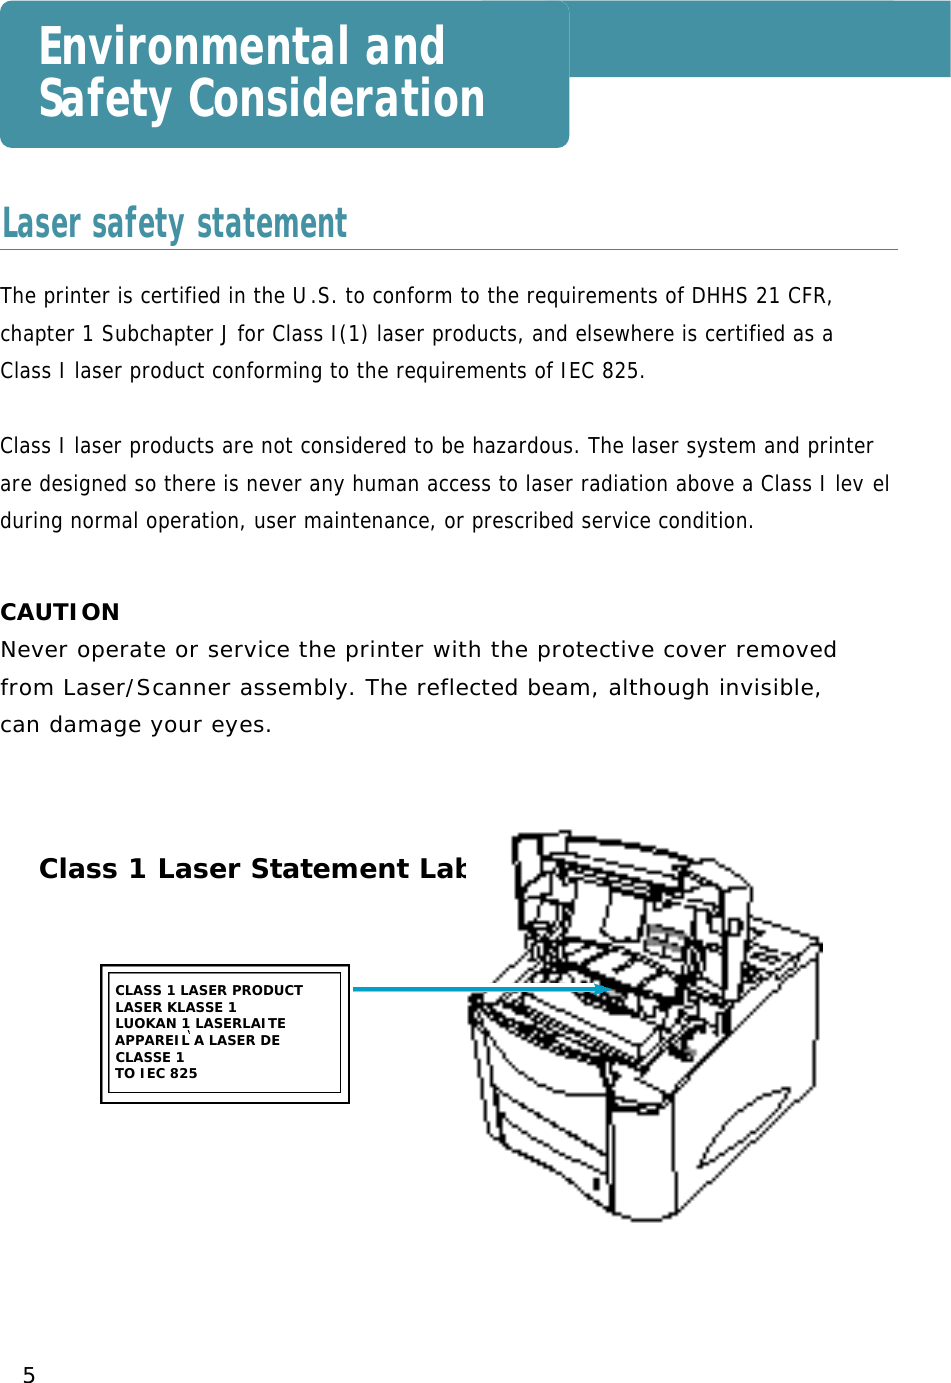 5Environmental andSafety ConsiderationThe printer is certified in the U. S. to conform to the requirements of DHHS 21 CFR,chapter 1 Subchapter J for Class I(1) laser products, and elsewhere is certified as aClass I laser product conforming to the requirements of IEC 825.Class I laser products are not considered to be hazardous. The laser system and printerare designed so there is never any human access to laser radiation above a Class I lev e lduring normal operation, user maintenance, or prescribed service condition.CAUTIONN e ver operate or service the printer with the protective cover removed from Laser/Scanner assembly. The reflected beam, although invisible, can damage your eye s .CLASS 1 LASER PRODUCT LASER KLASSE 1LUOKAN 1 LASERLAITEAPPAREIL A LASER DECLASSE 1 TO IEC 825Class 1 Laser Statement LabelLaser safety statement